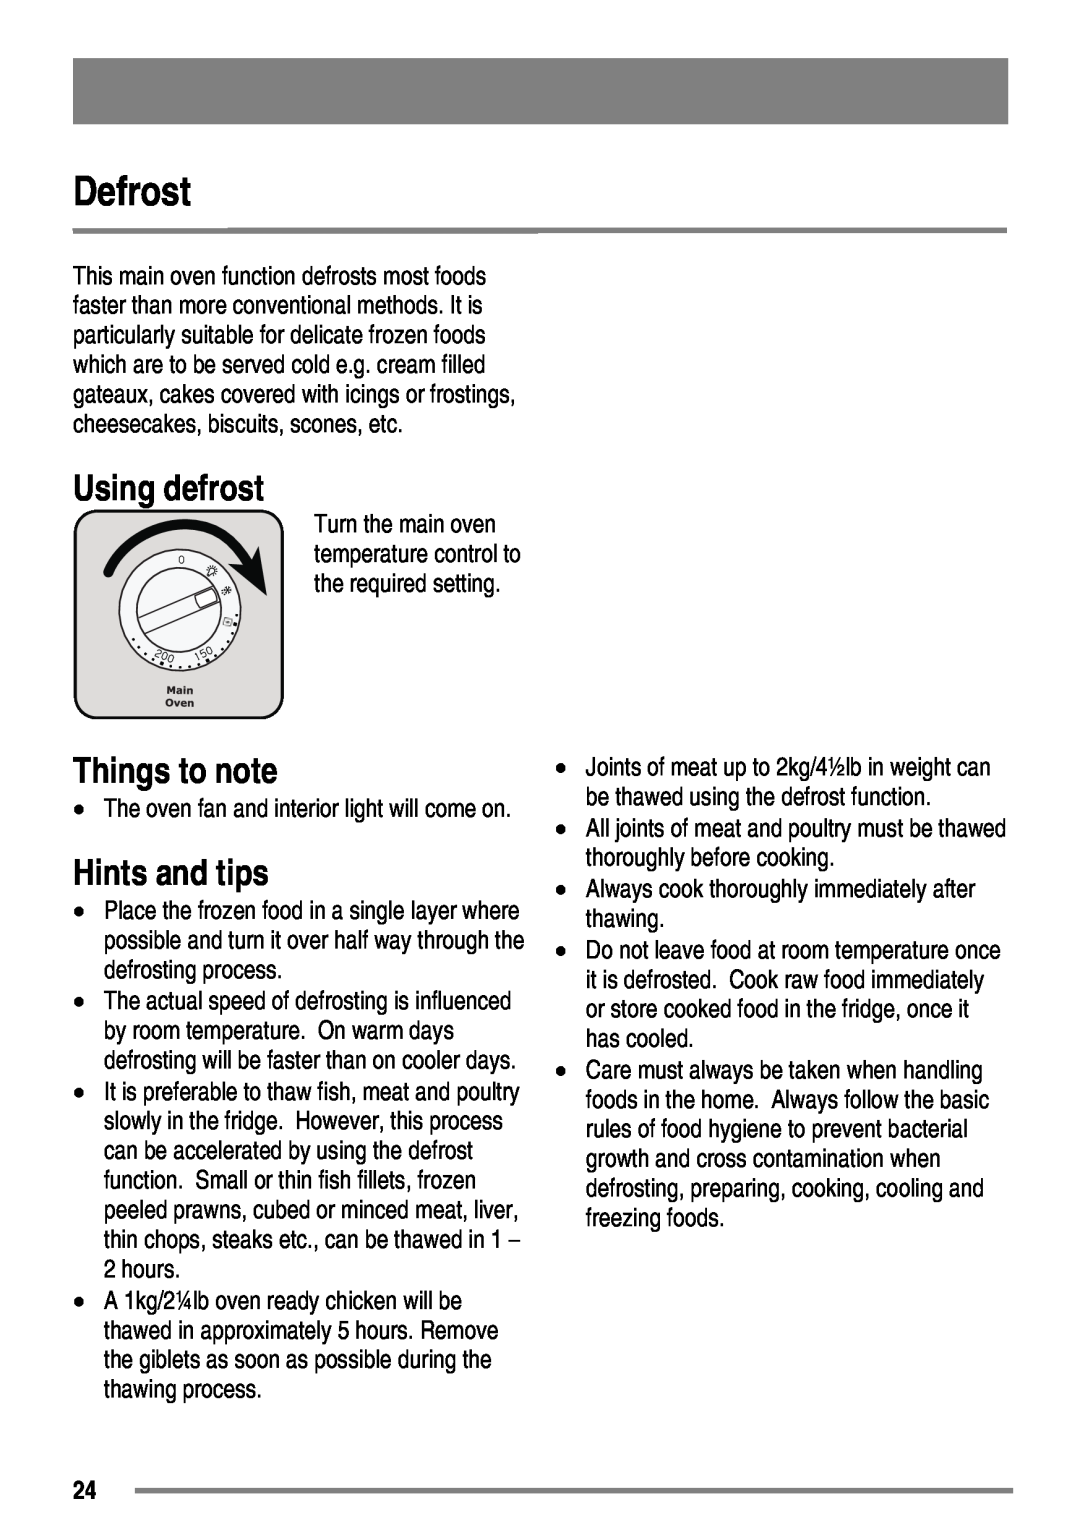 Zanussi ZKC5540 user manual Defrost, Using defrost, Things to note, Hints and tips 